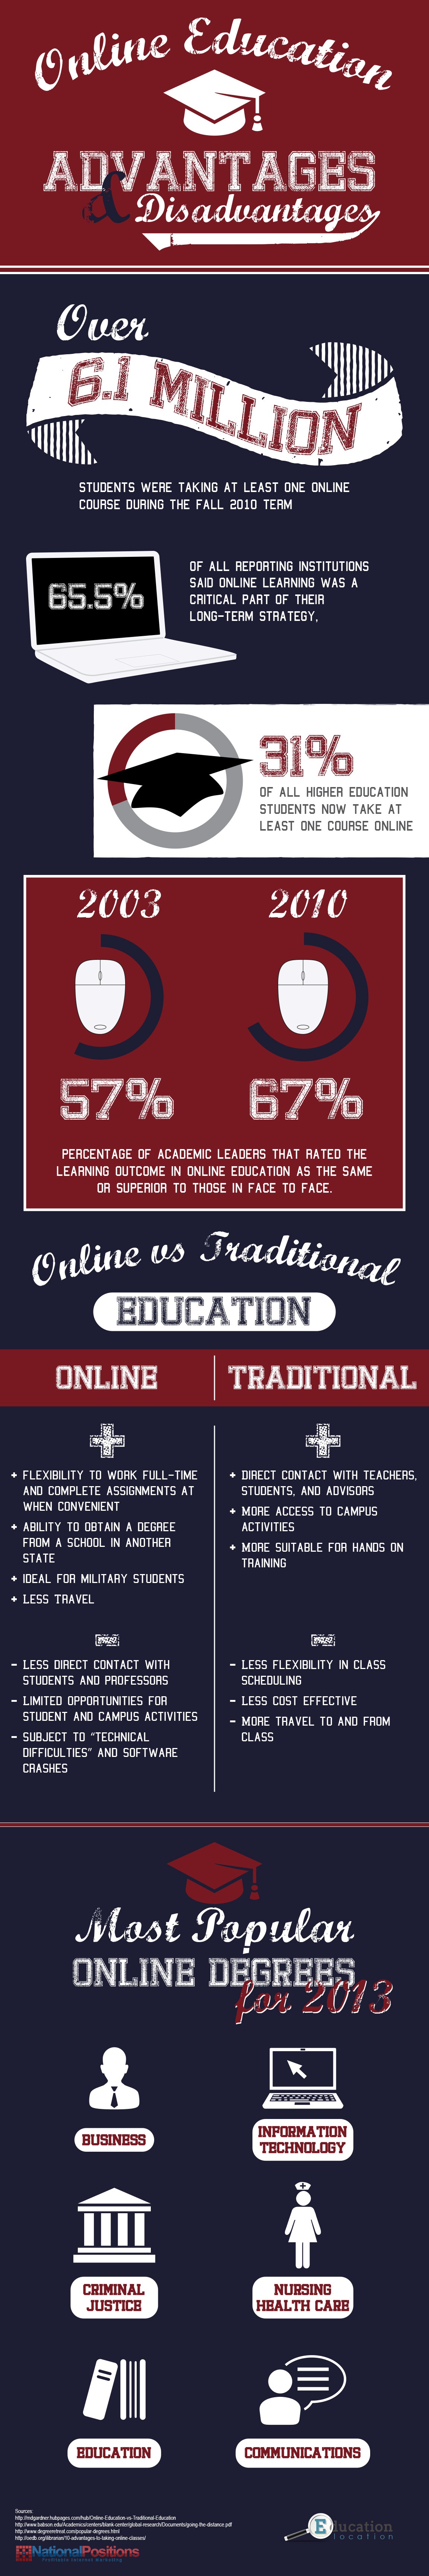 Advantages and Disadvantages of Online Education Infographic